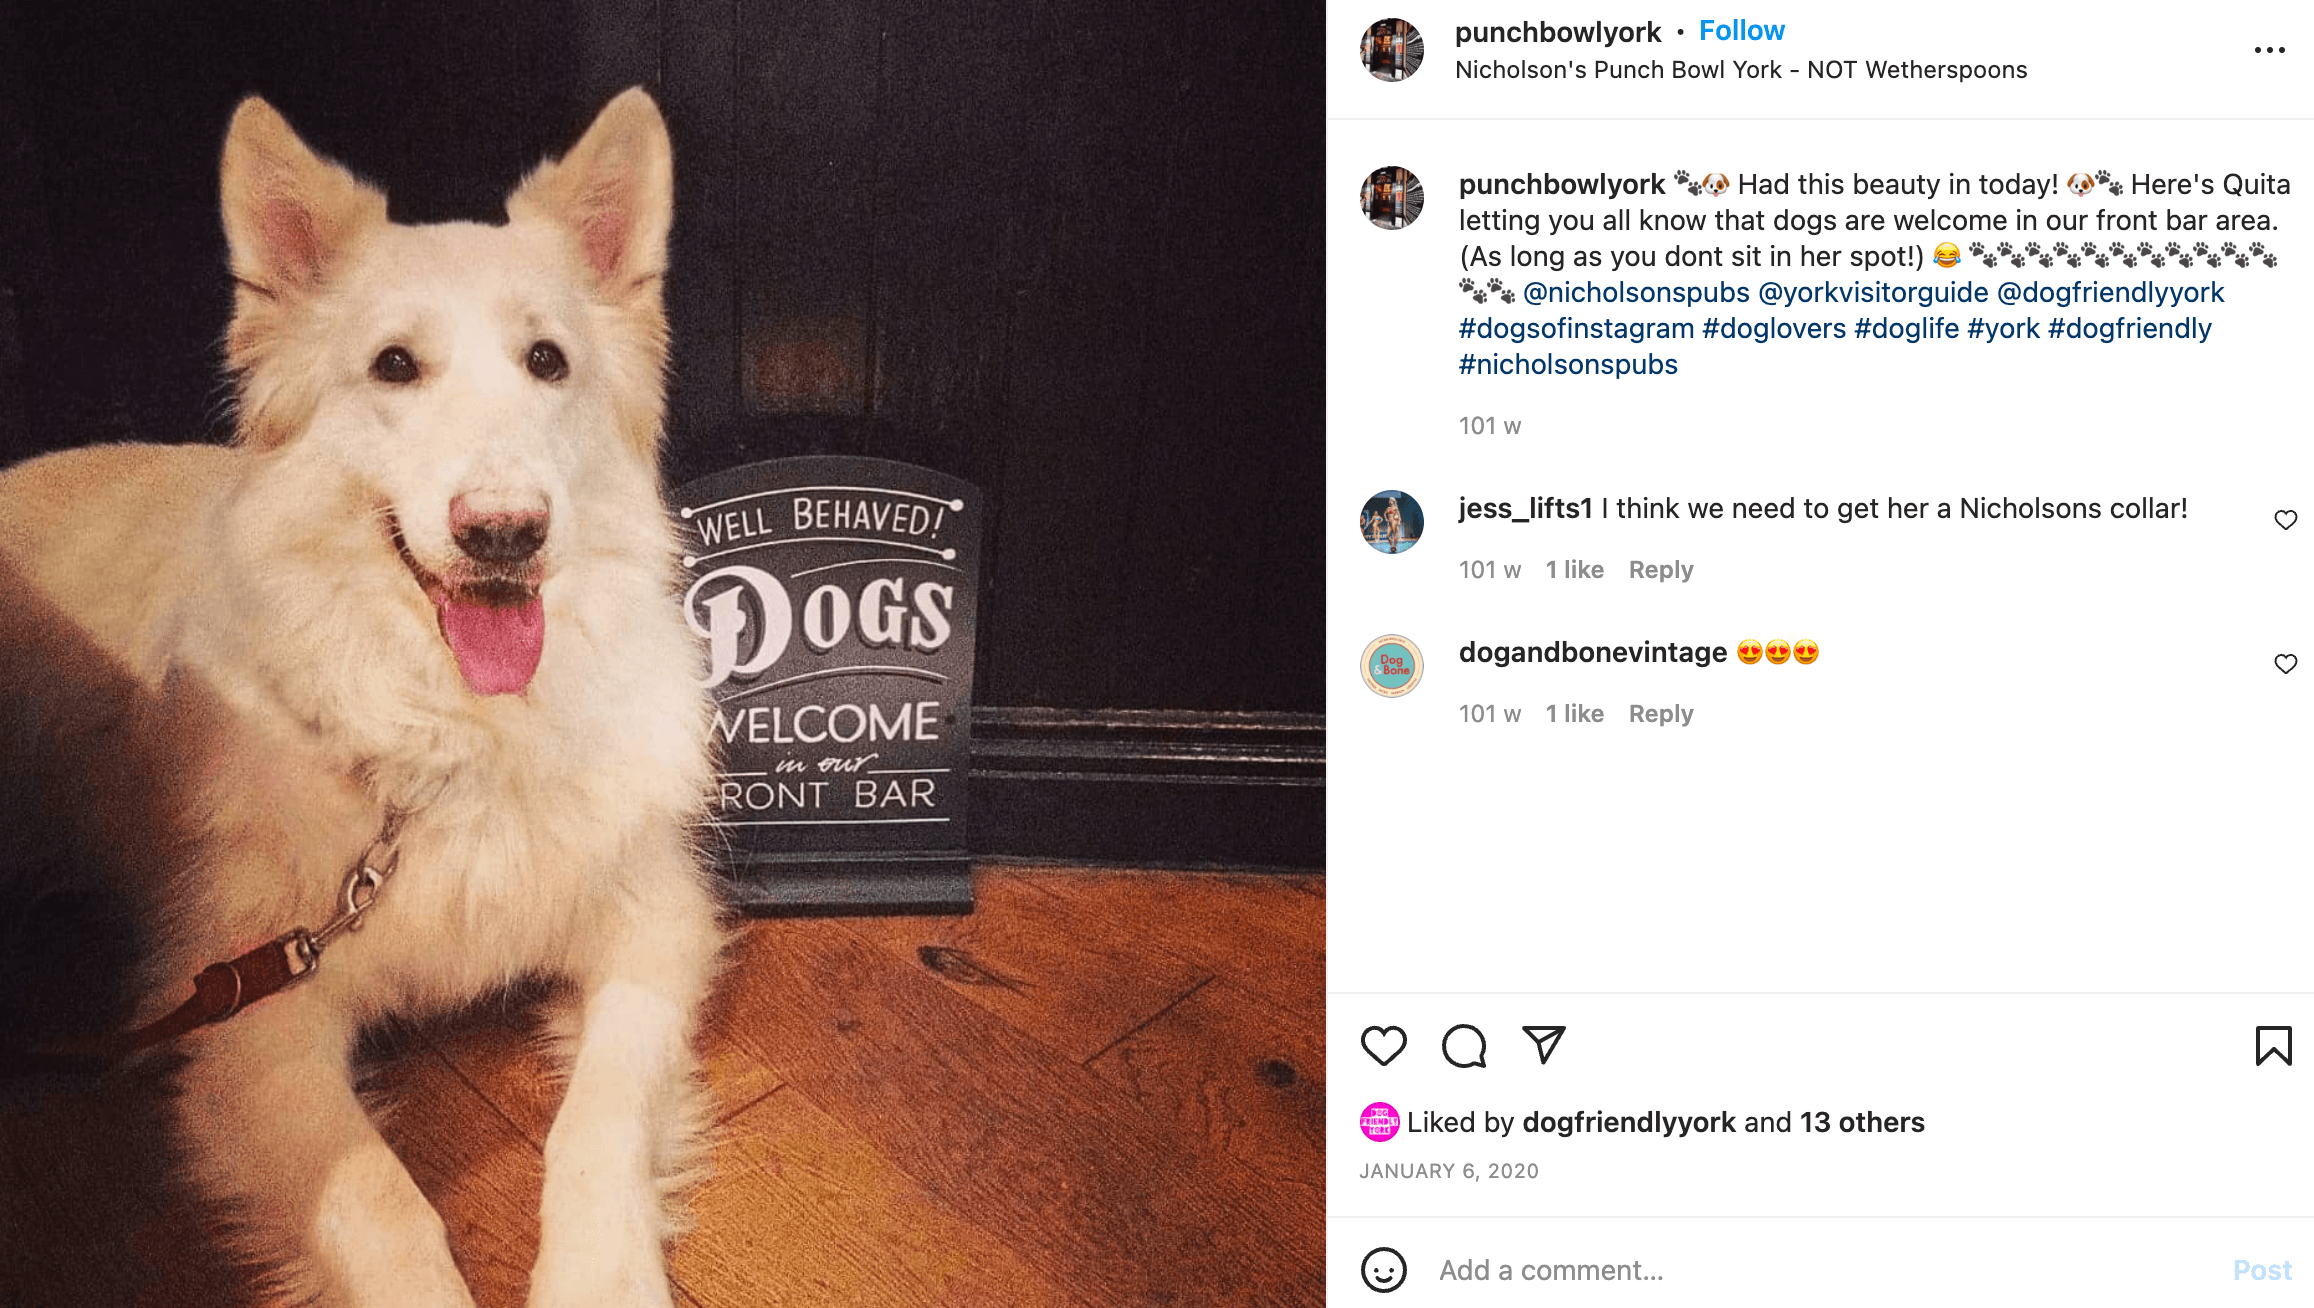 Instagram post of a large white dog lying down next to a 'dogs welcome' sign